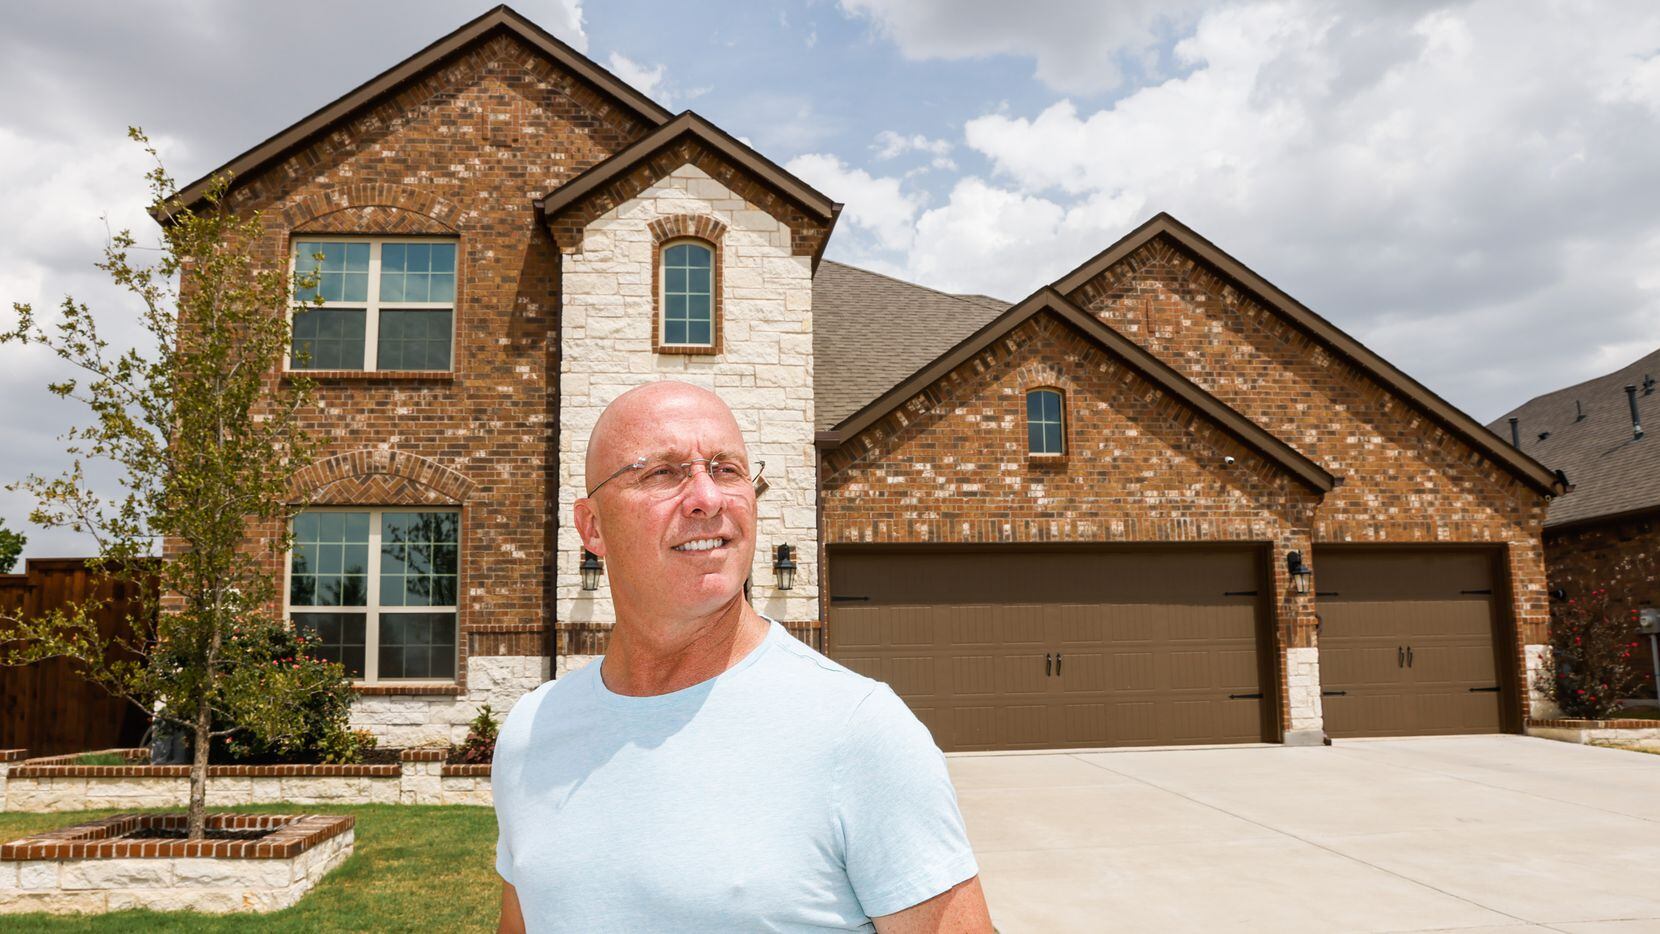 Chris Karhu lives in Silverado, a master-planned community in Aubrey that's among the...